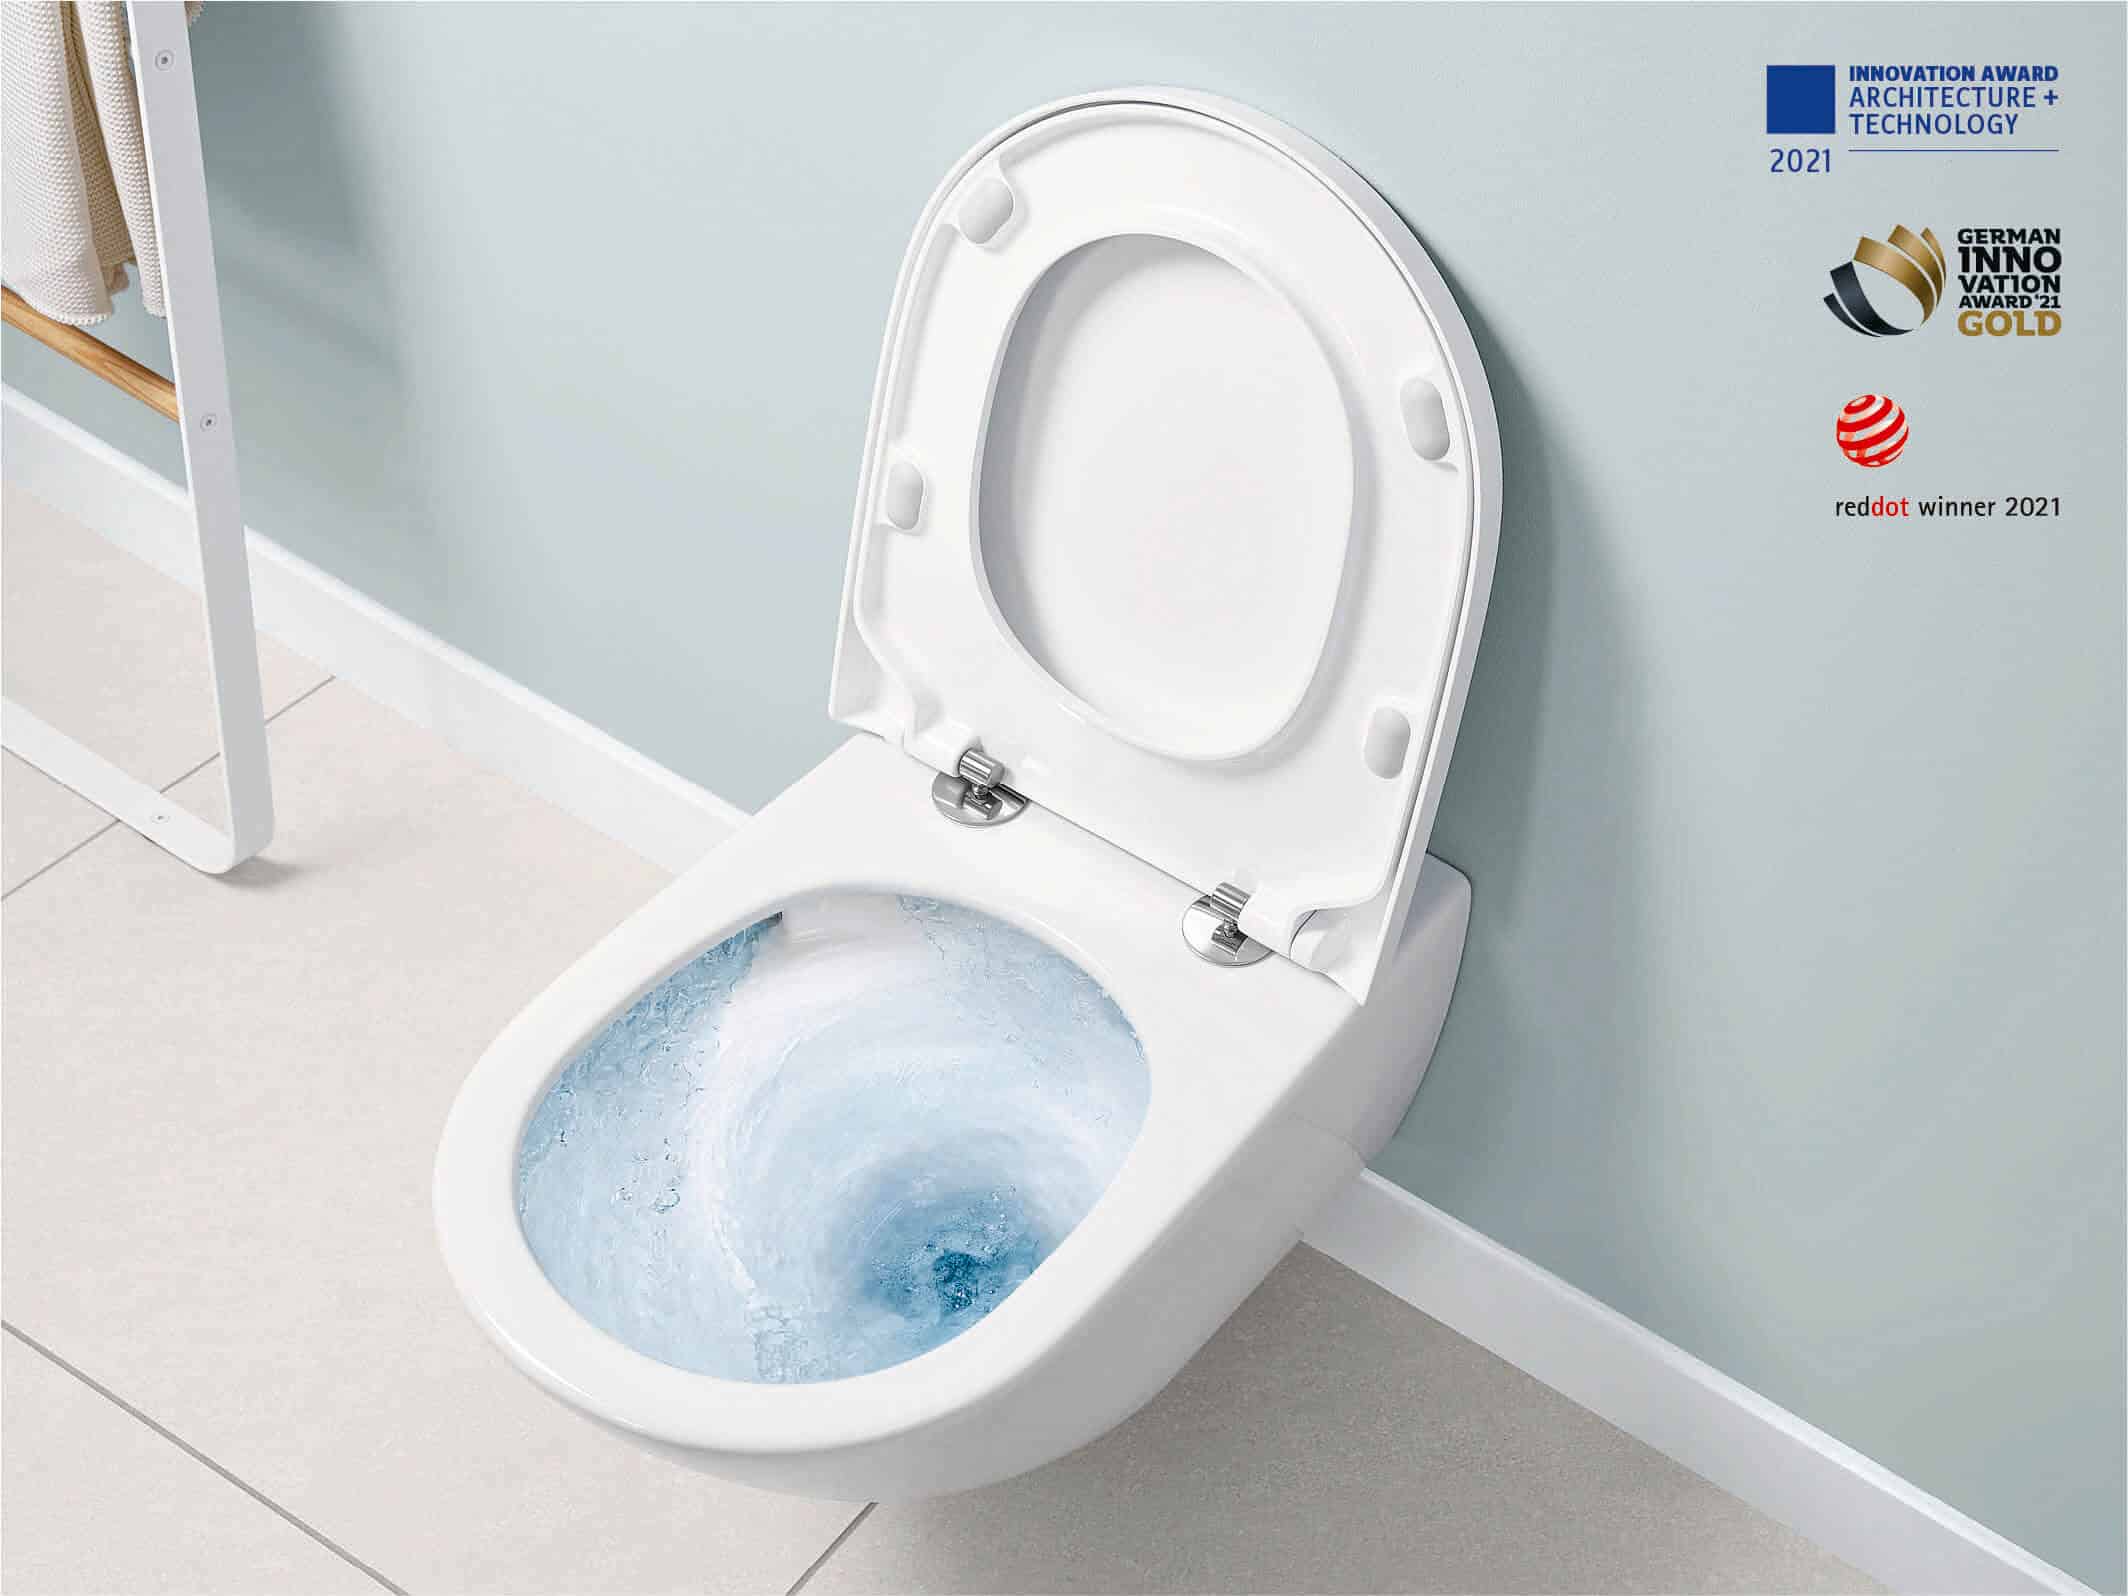 TwistFlush – Villeroy & Boch’s innovative flush toilet for more cleanliness & less water consumption